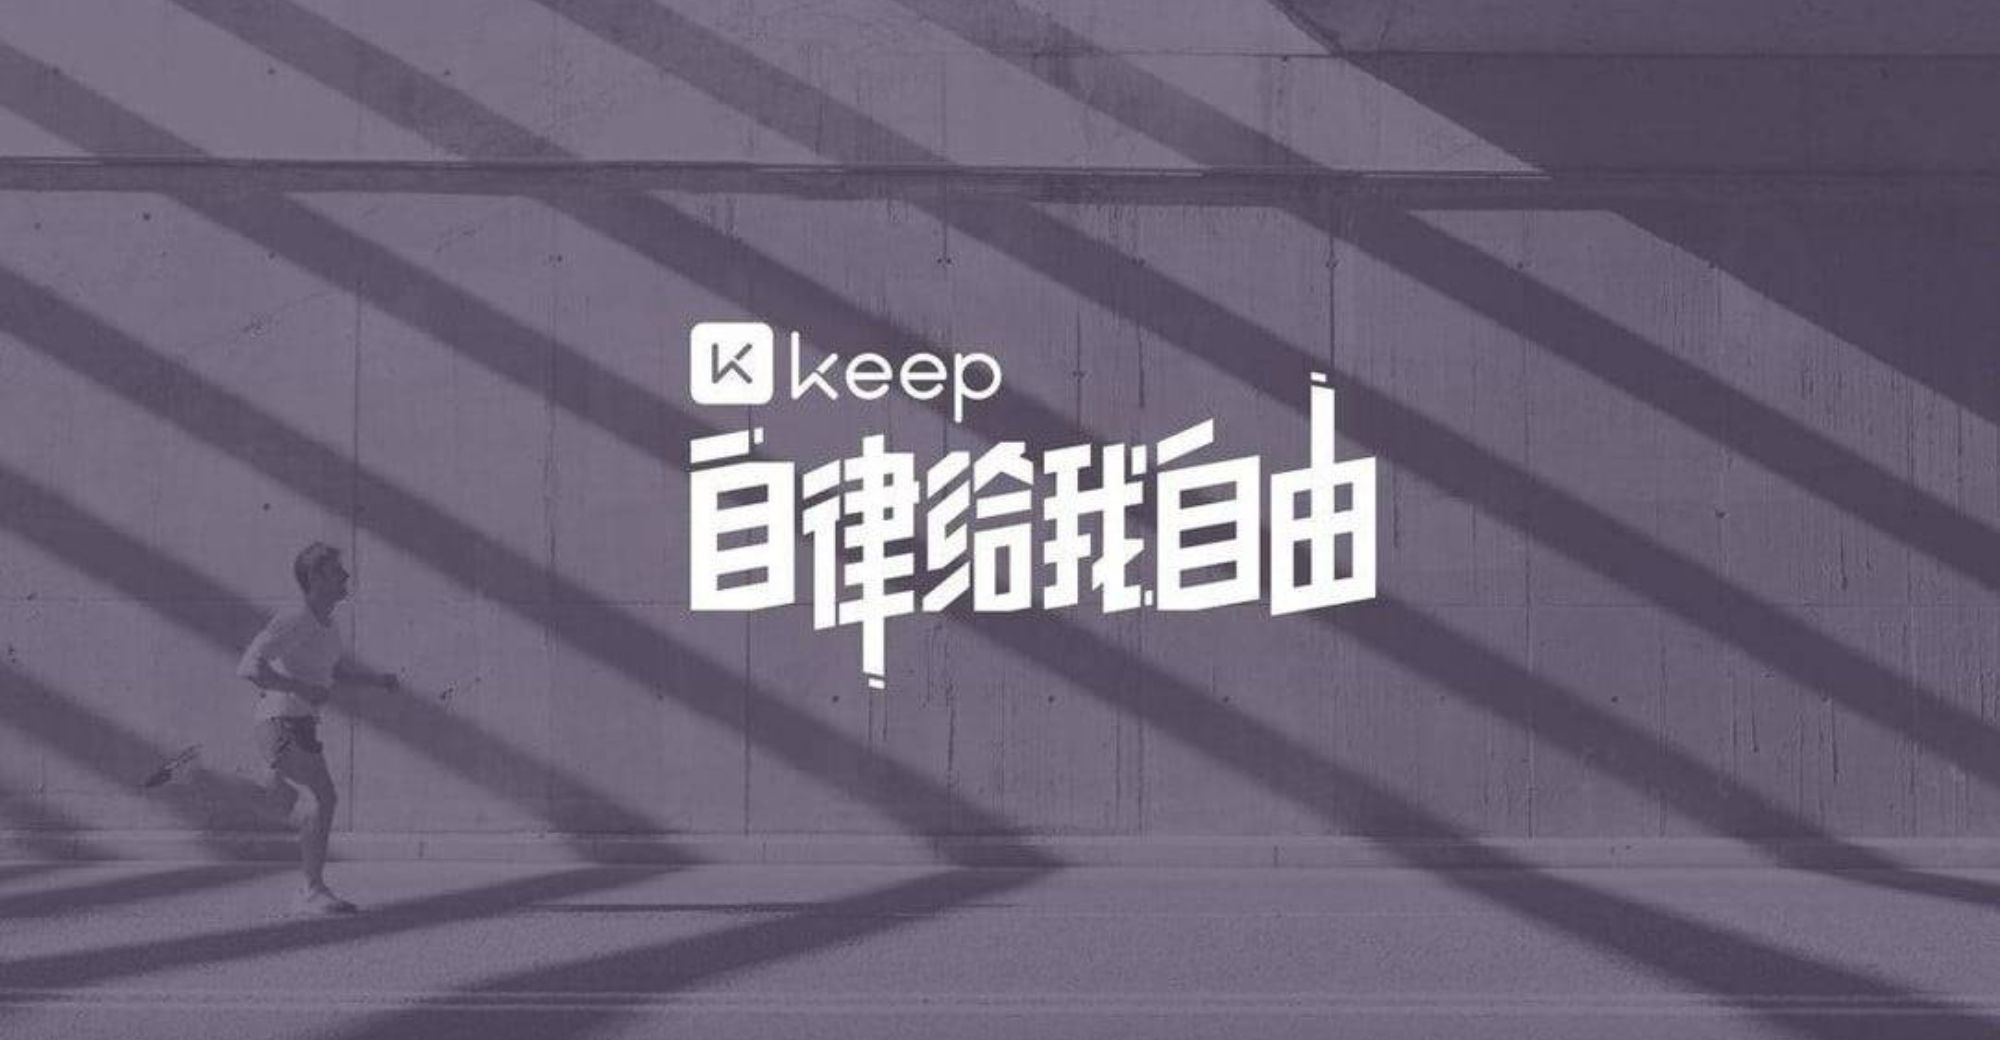 Keep’s Stock Price Falls More than 30%, Hitting A New Low